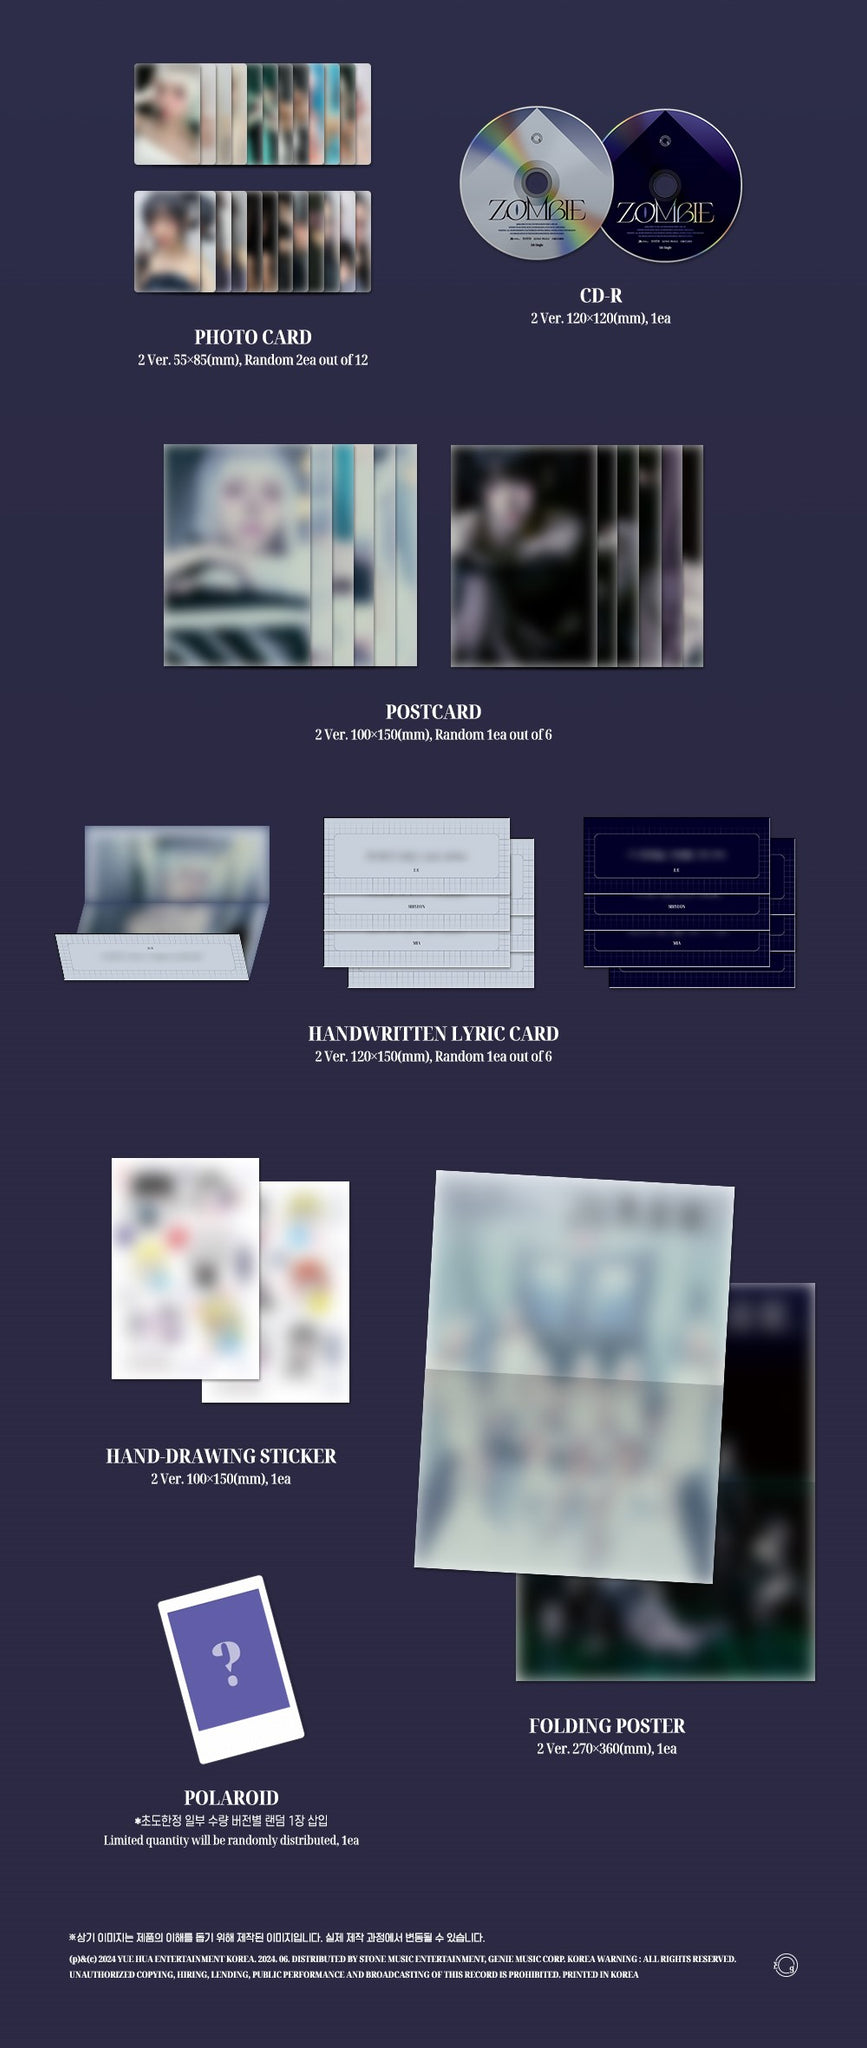 EVERGLOW 5th Single Album ZOMBIE - Pulse / Heart Version Inclusions: CD, Photocards, Postcard, Handwritten Lyric Card, Hand-drawing Stickers, Folding Poster, 1st Press Only Polaroid